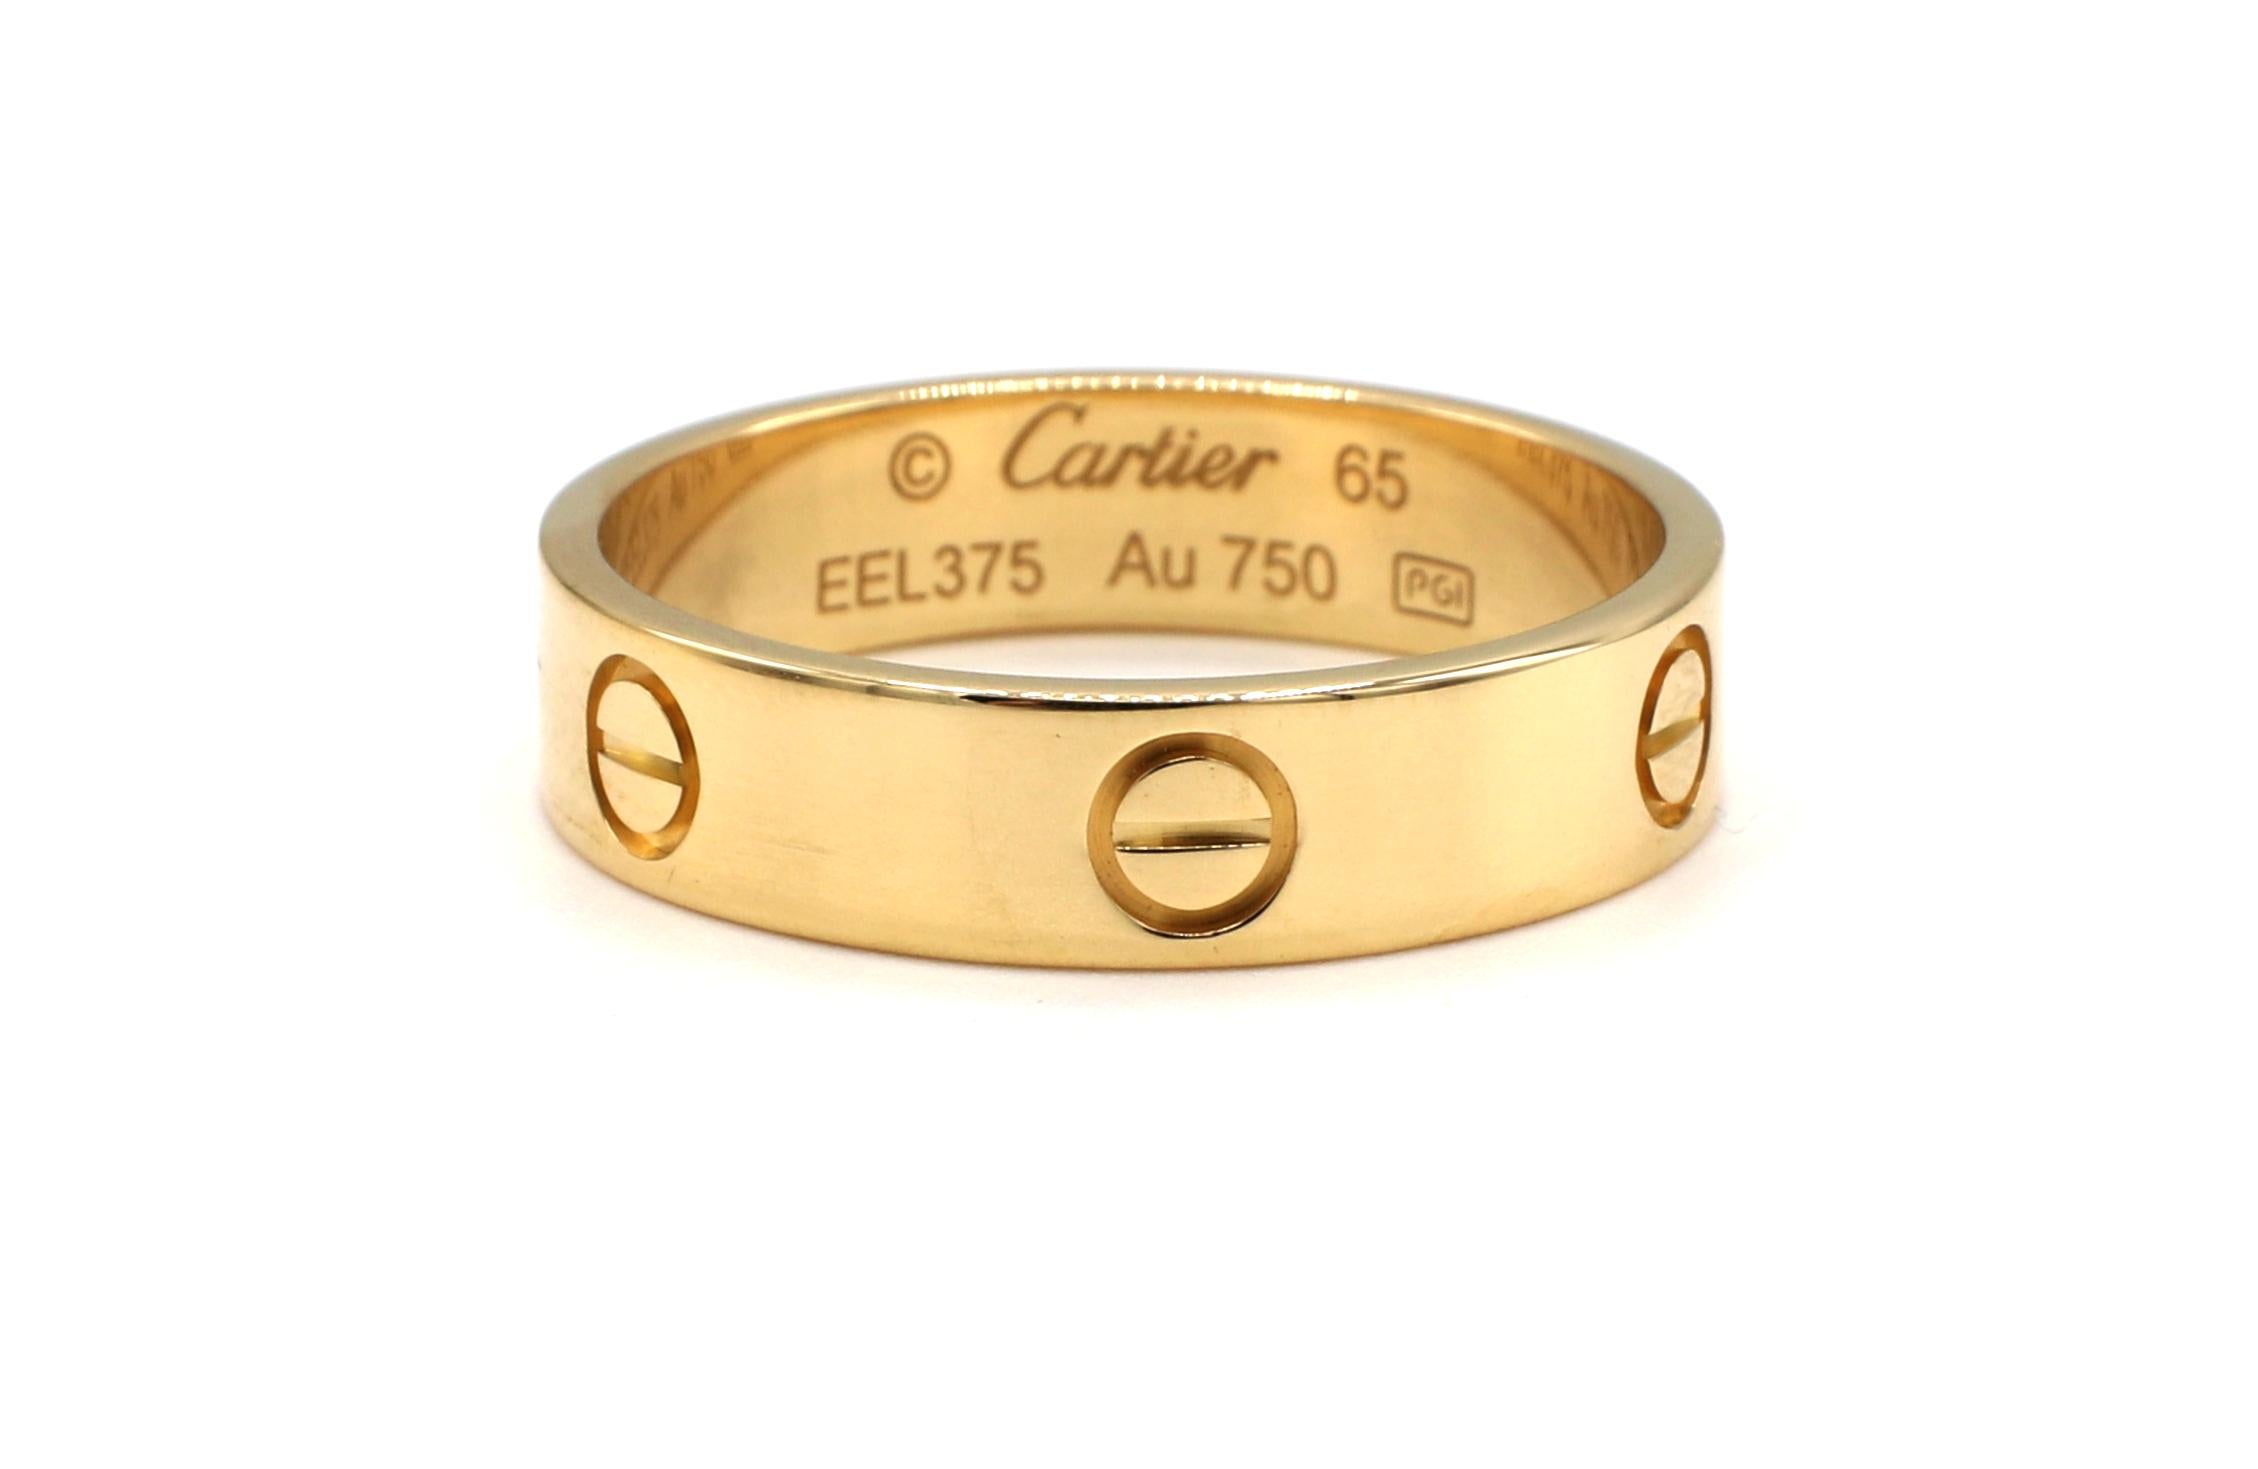 Cartier Love Ring Yellow Gold Size 65 
Metal: 18k yellow gold
Weight: 7.13 grams
Size: 65 (11 US)
Width: 5.5MM
Certificate included 